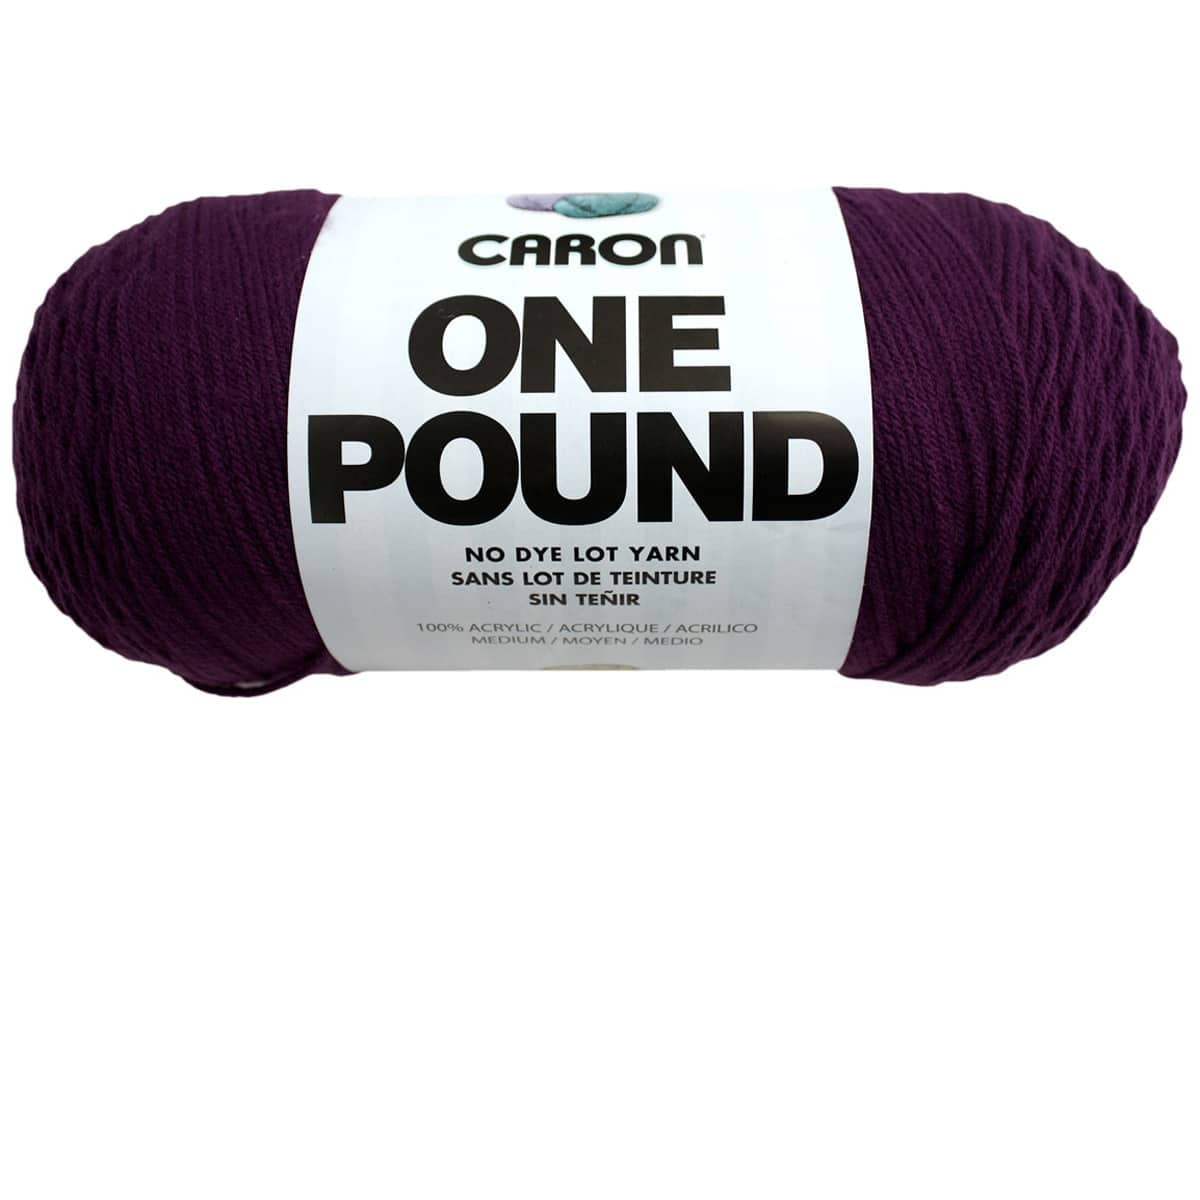 Caron One Pound Yarn CHOOSE COLOR no dye lot new in package FREE Shipping!  12 colors